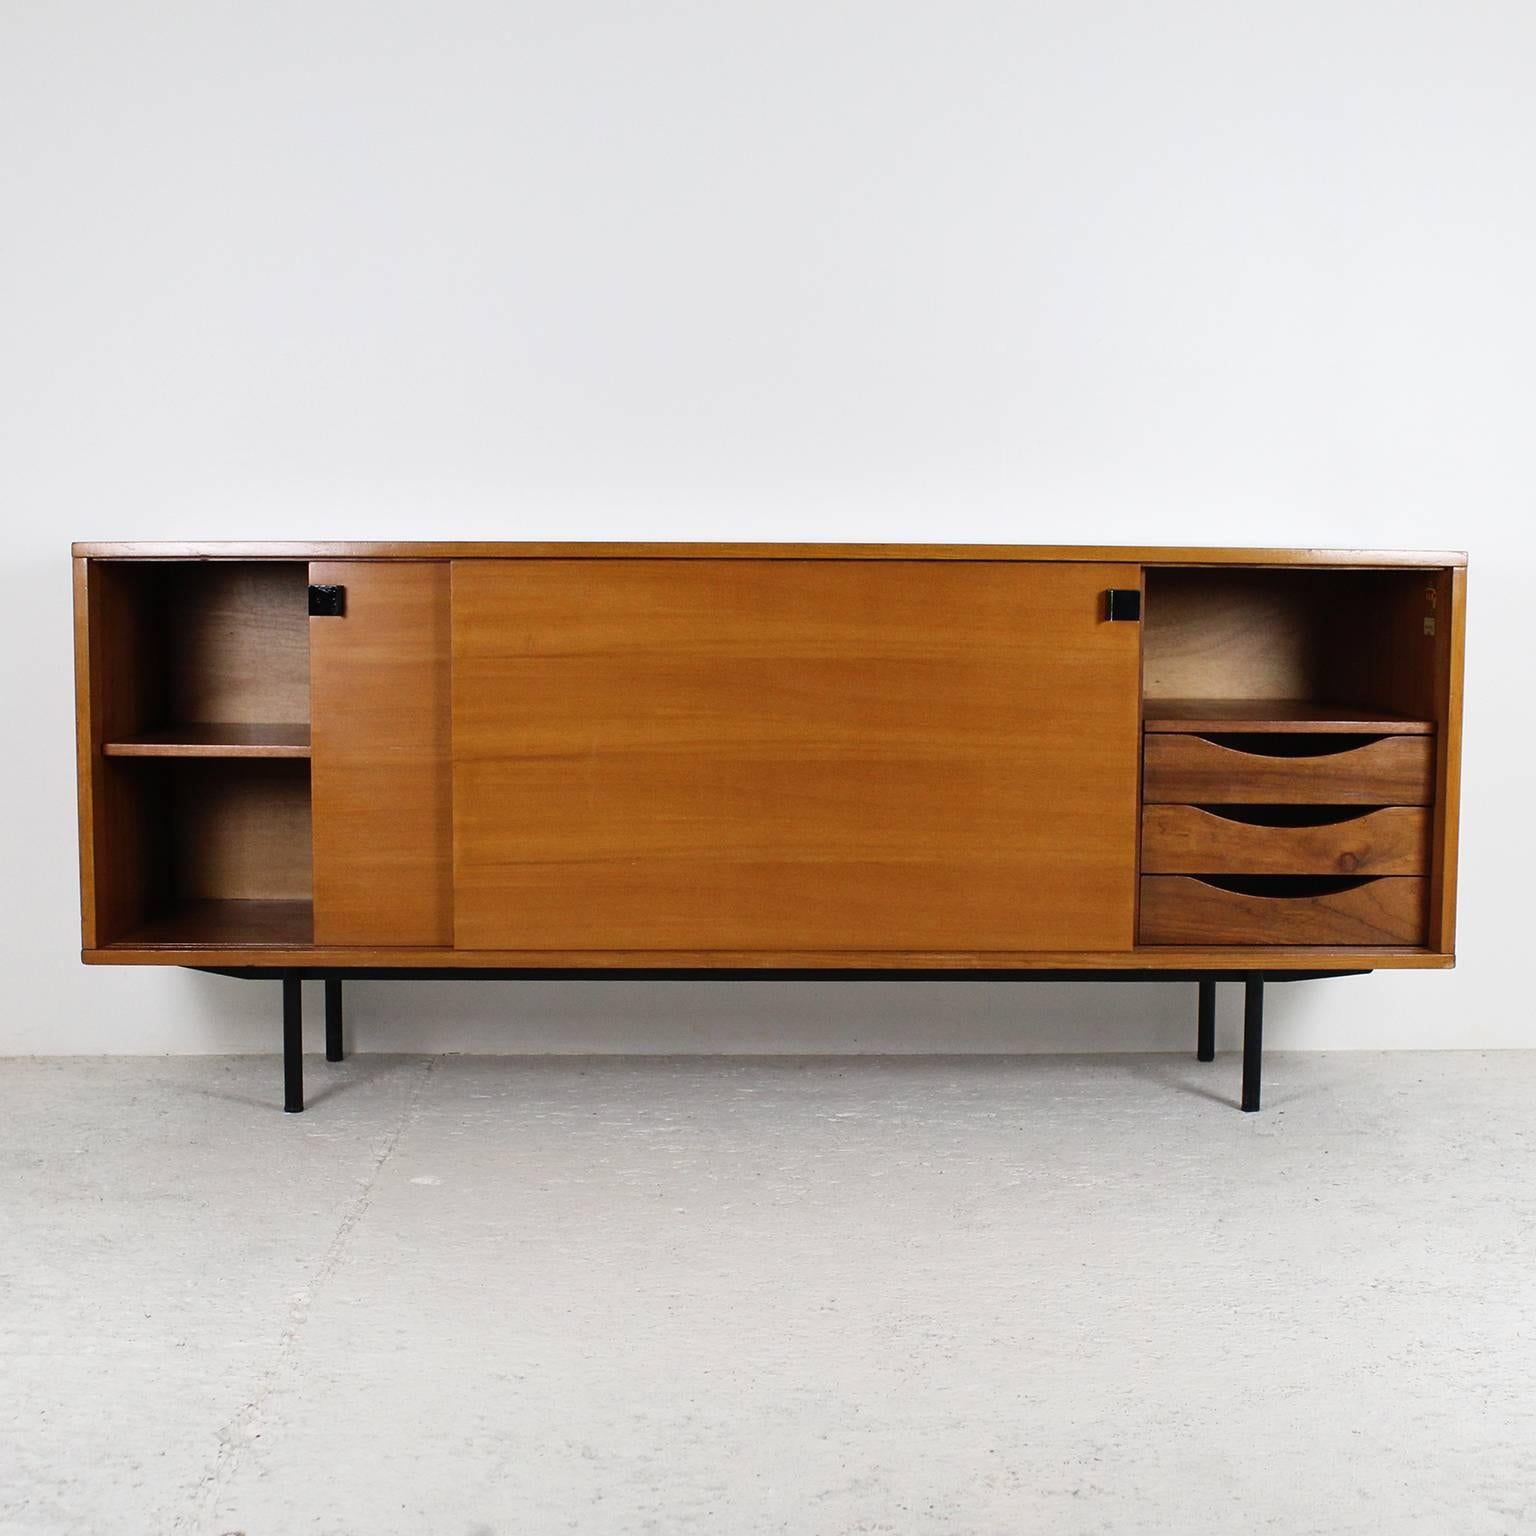 A sleek design for this sideboard by Alain Richard, manufactured by Meubles TV in 1954. The two sliding doors are opening on a set of drawers and shelves providing a good storage capacity. The frame is in elm burr veneer and the tubular legs are